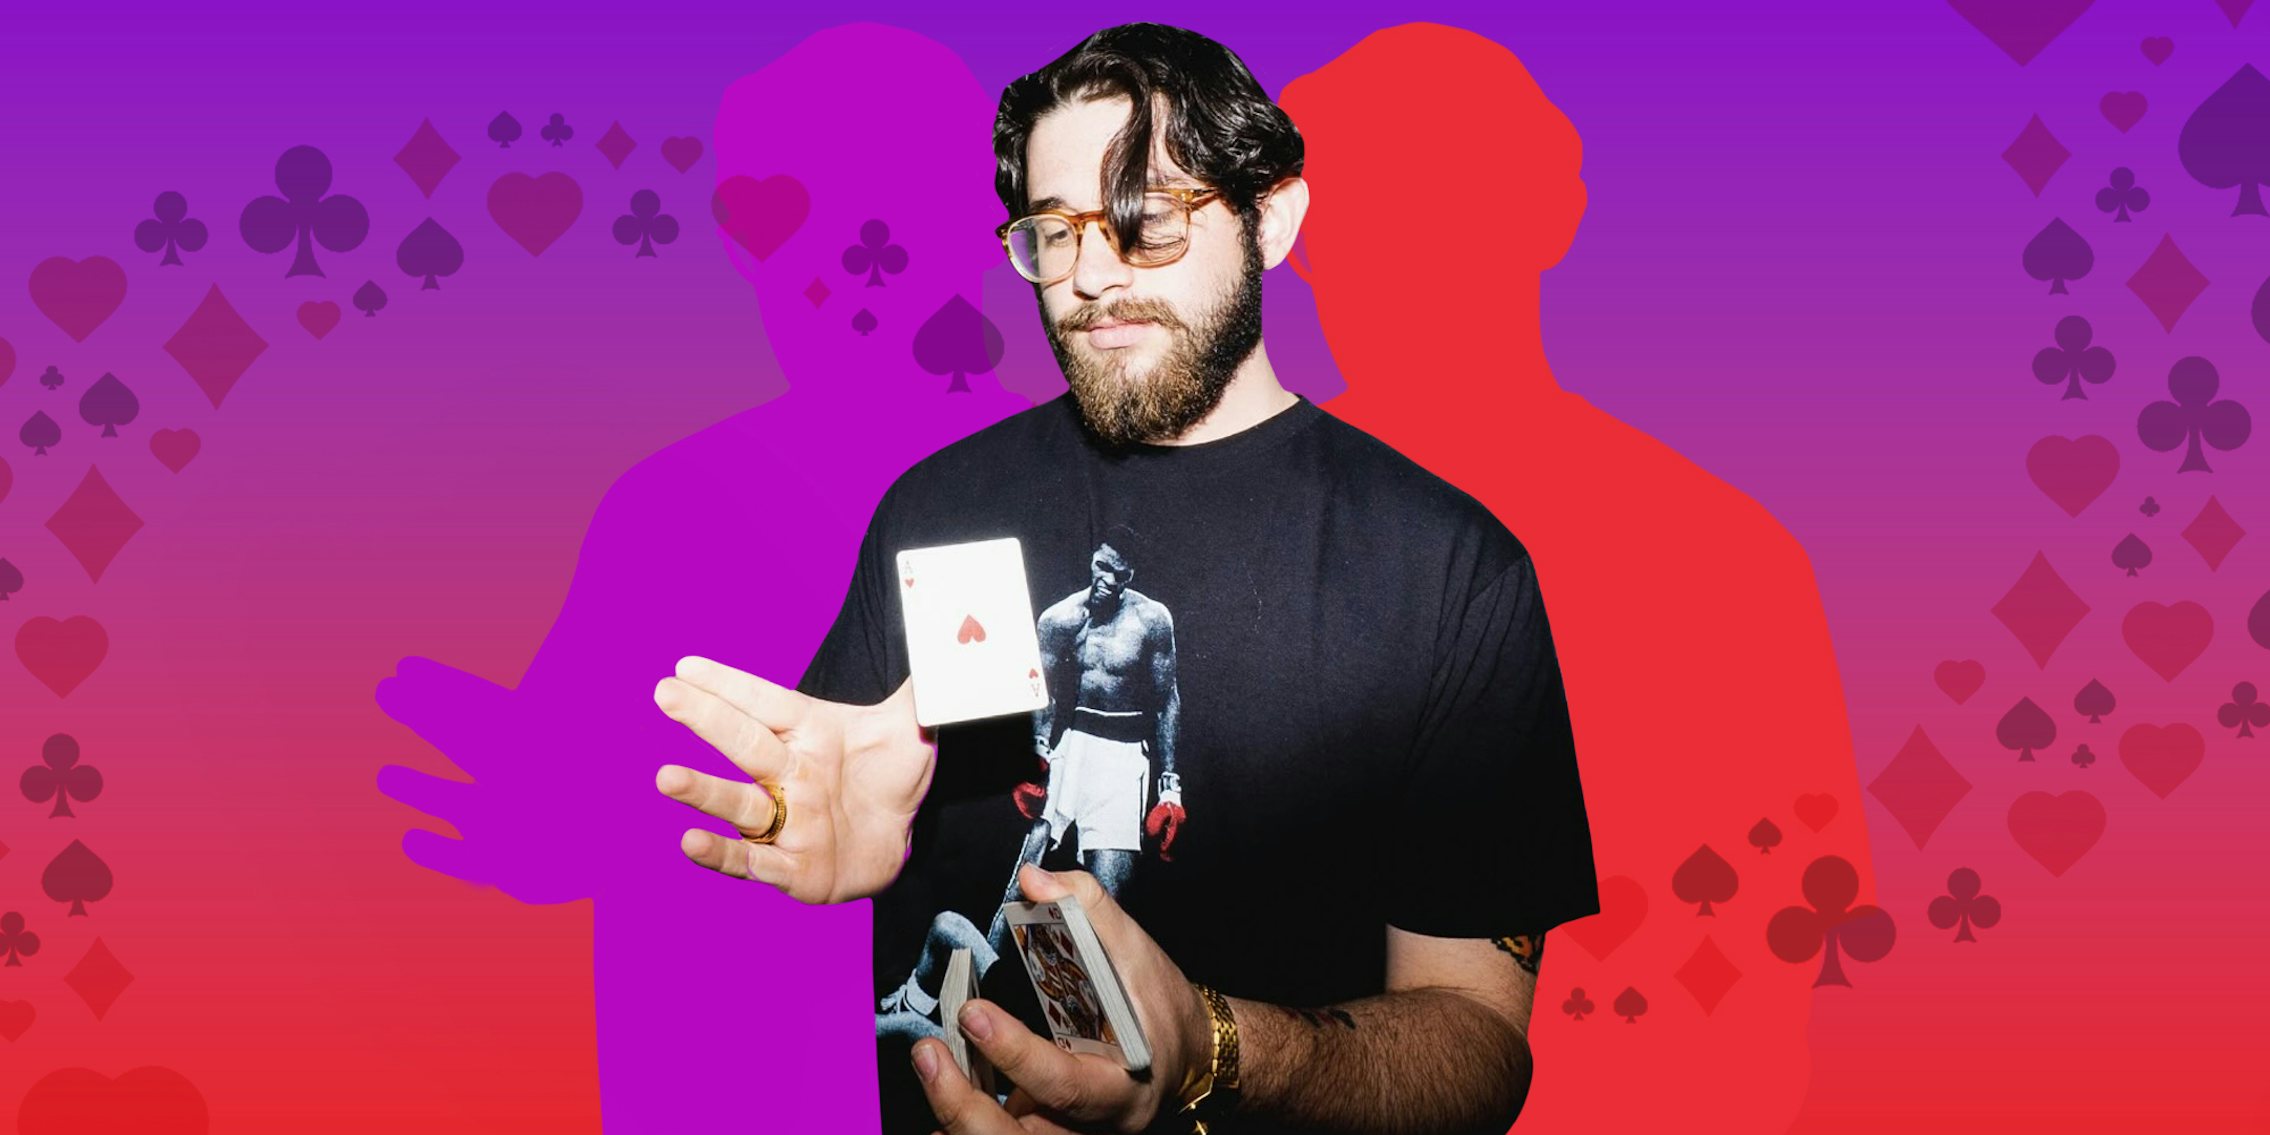 Evan the card guy holding cards on purple to red gradient background Passionfruit Remix